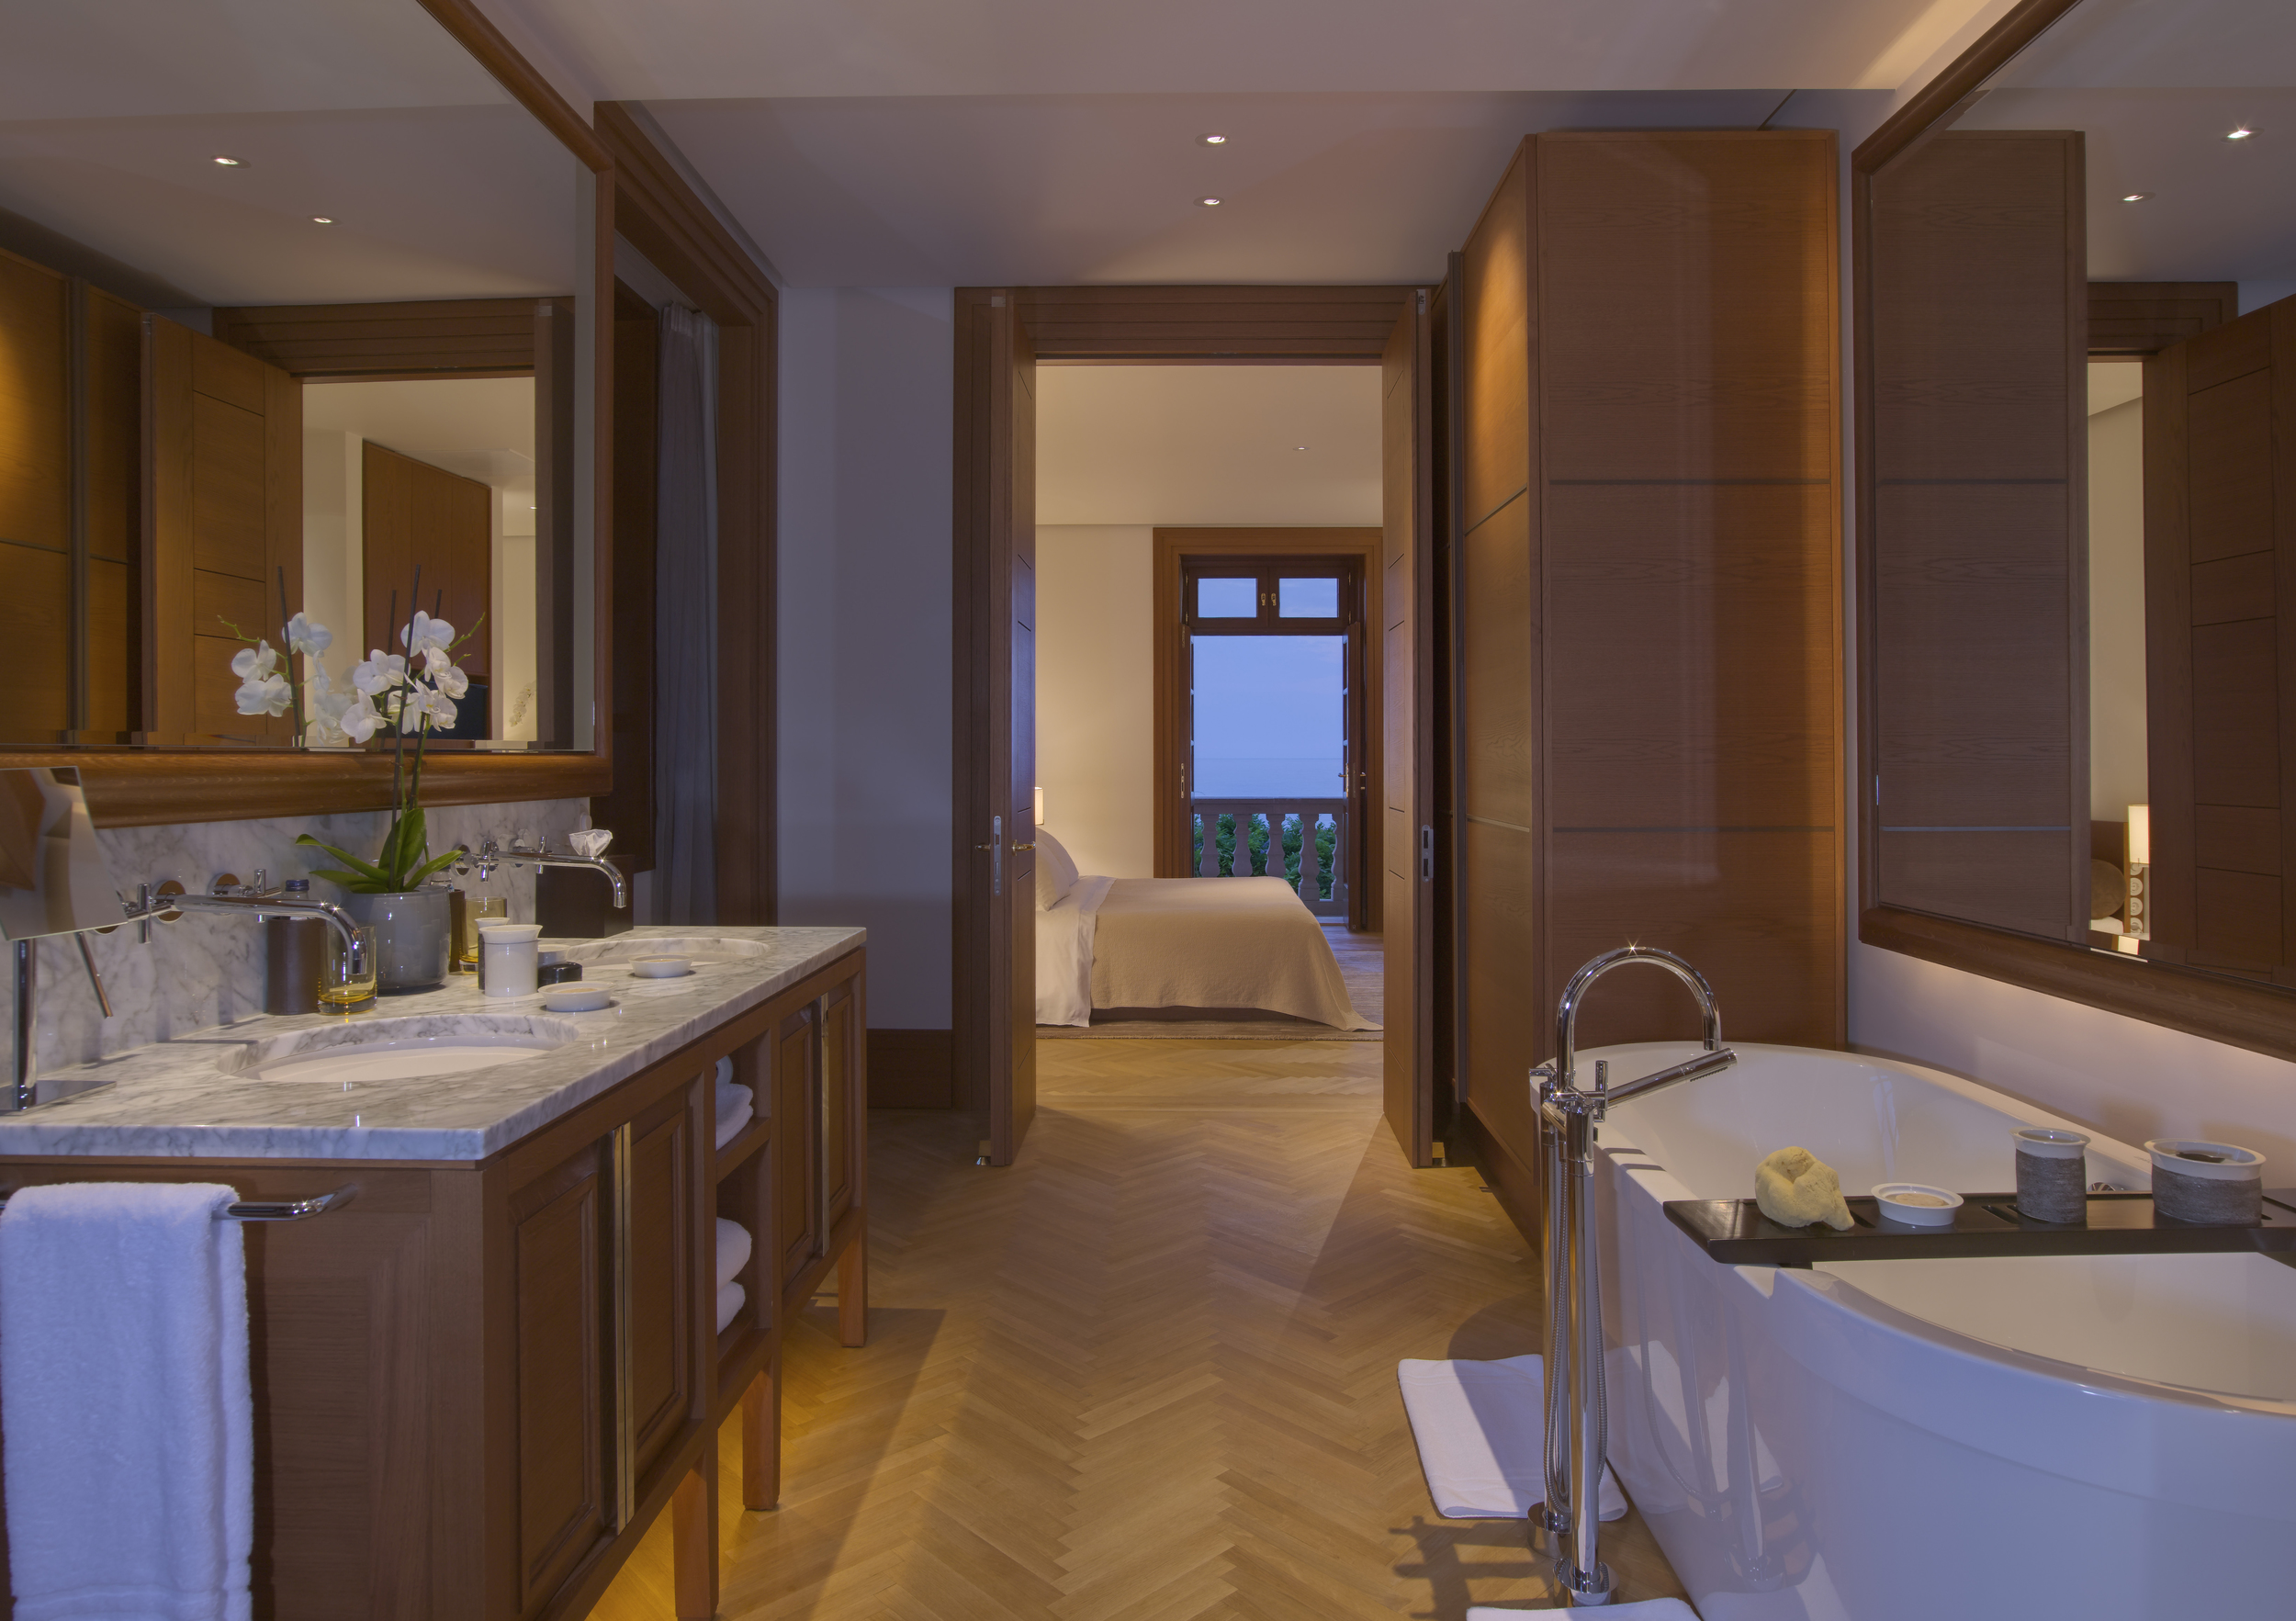  A suite at the  Aman Sveti Stefan  in Montenegro, once a royal villa. 